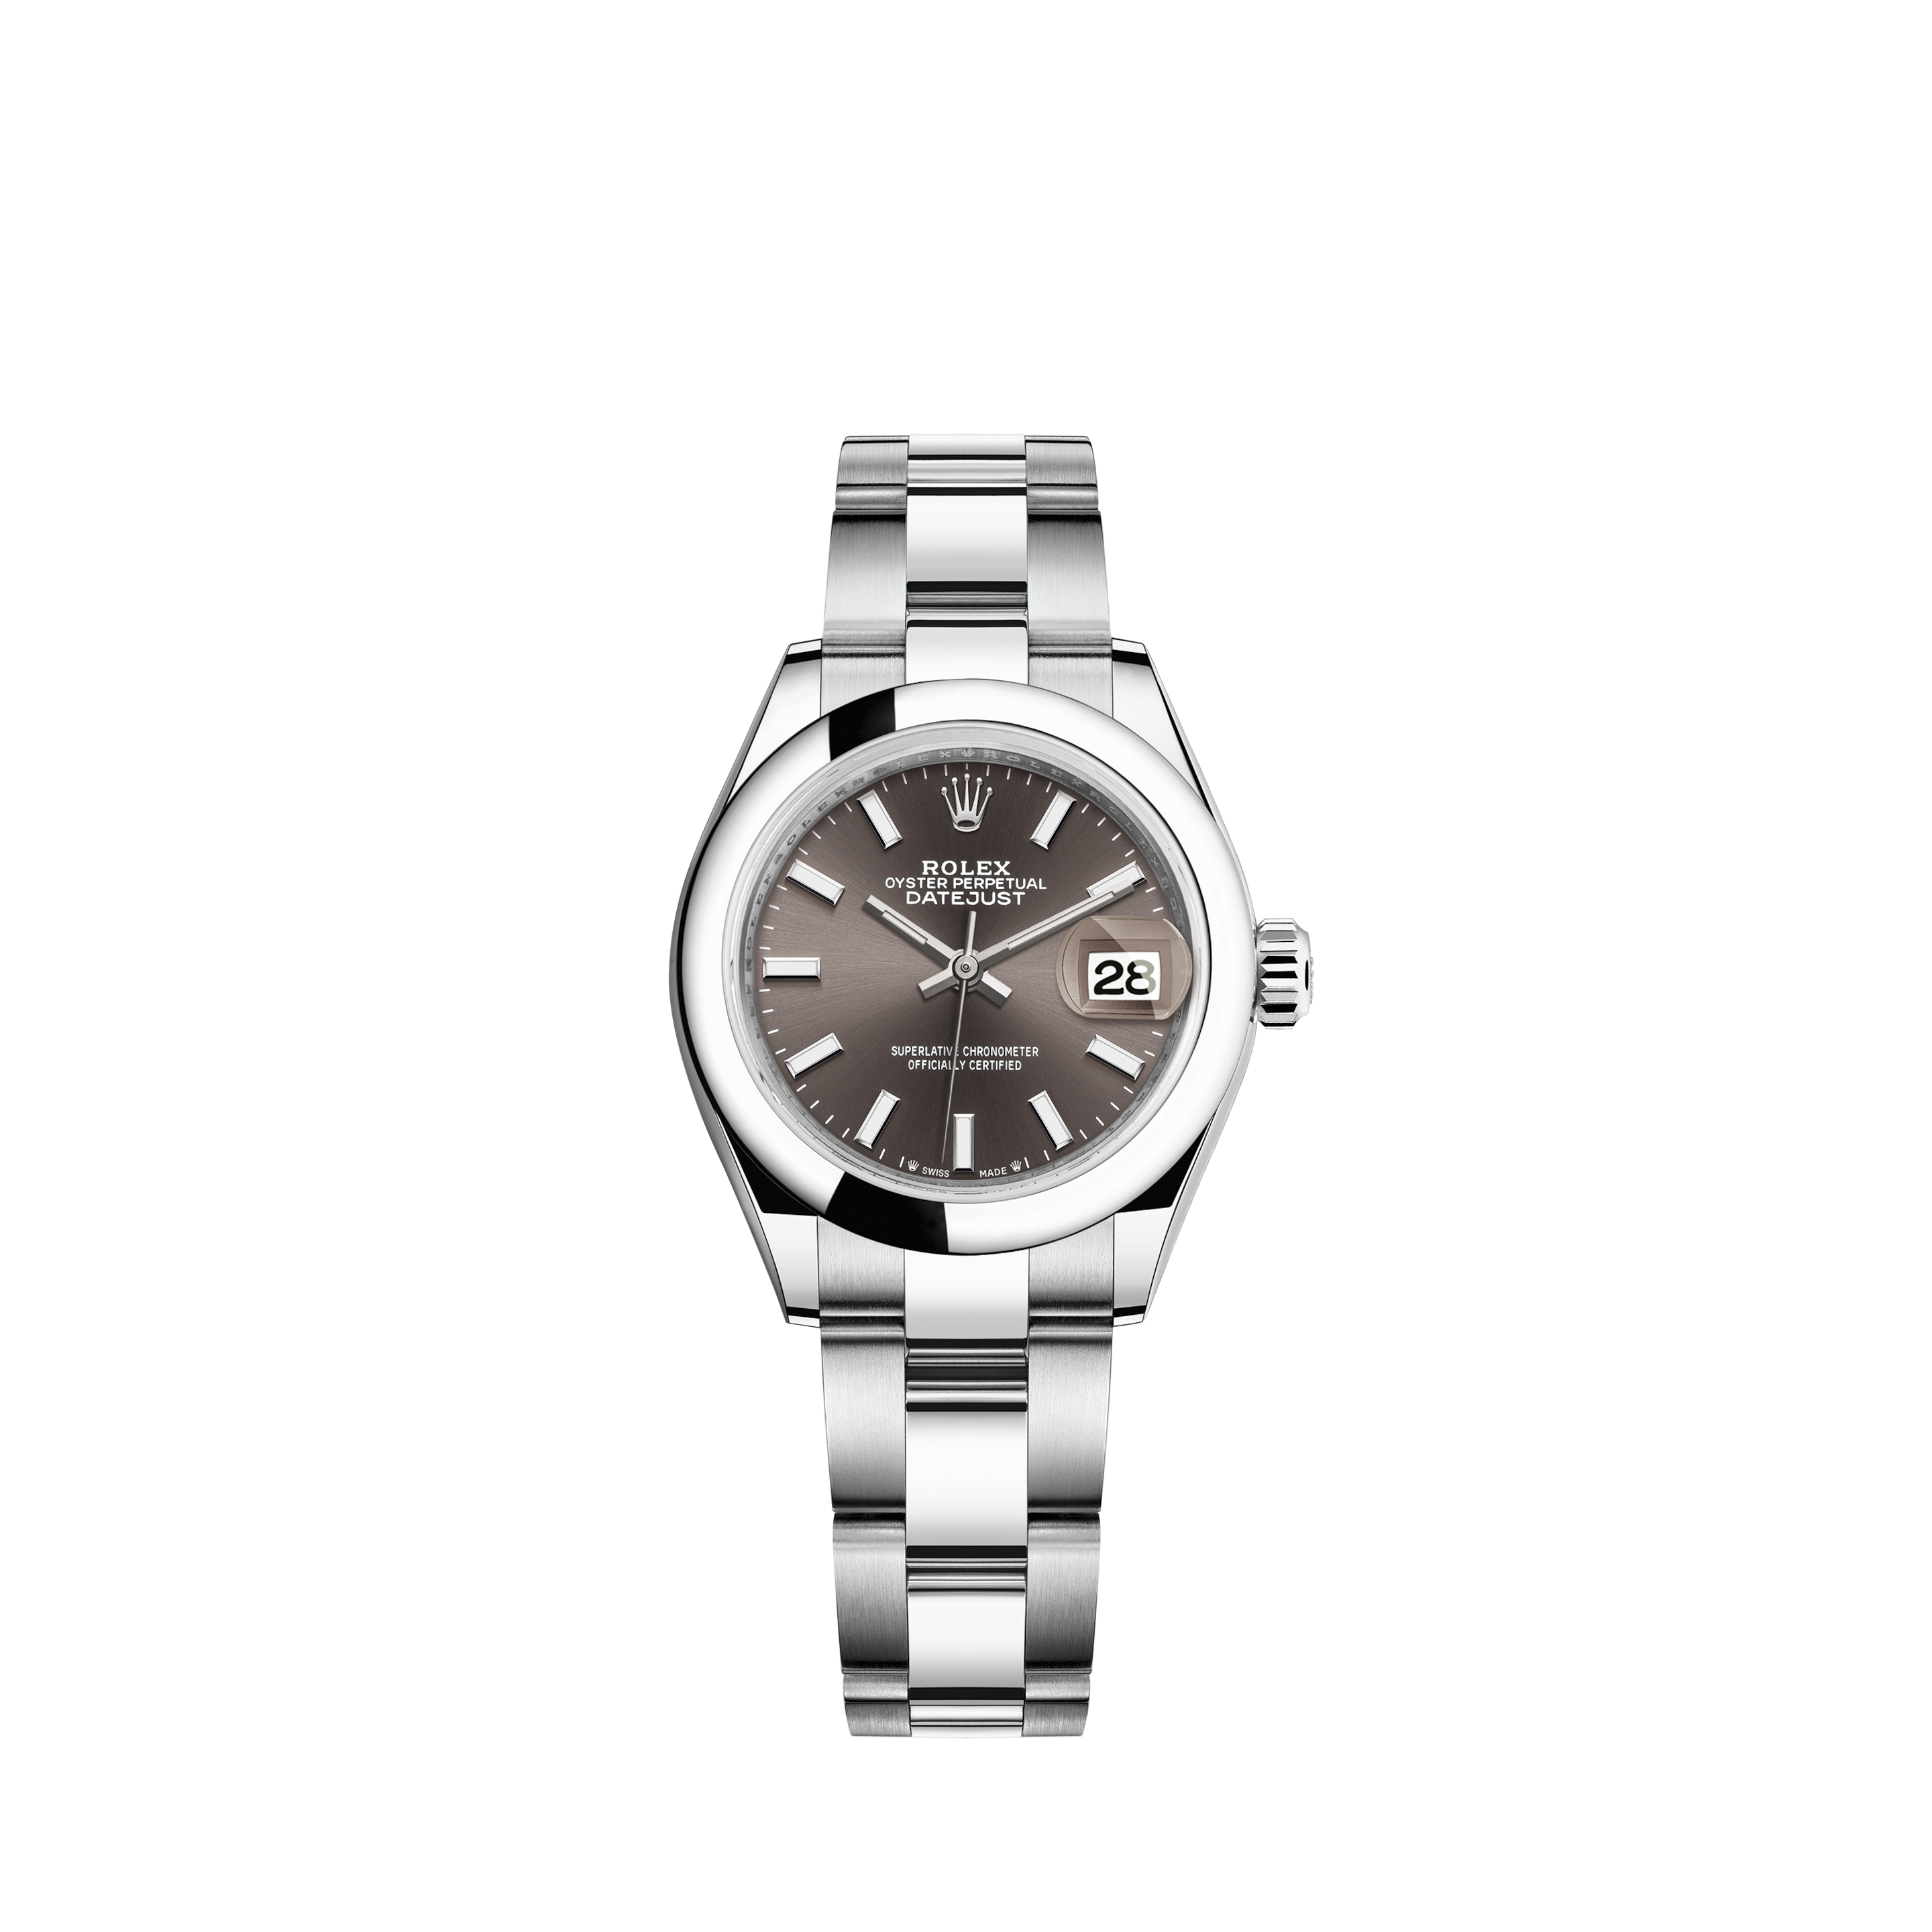 Rolex Oyster Perpetual Date 6516Rolex Oyster Perpetual Date 6534 Stainless Steel Roulette Date Window